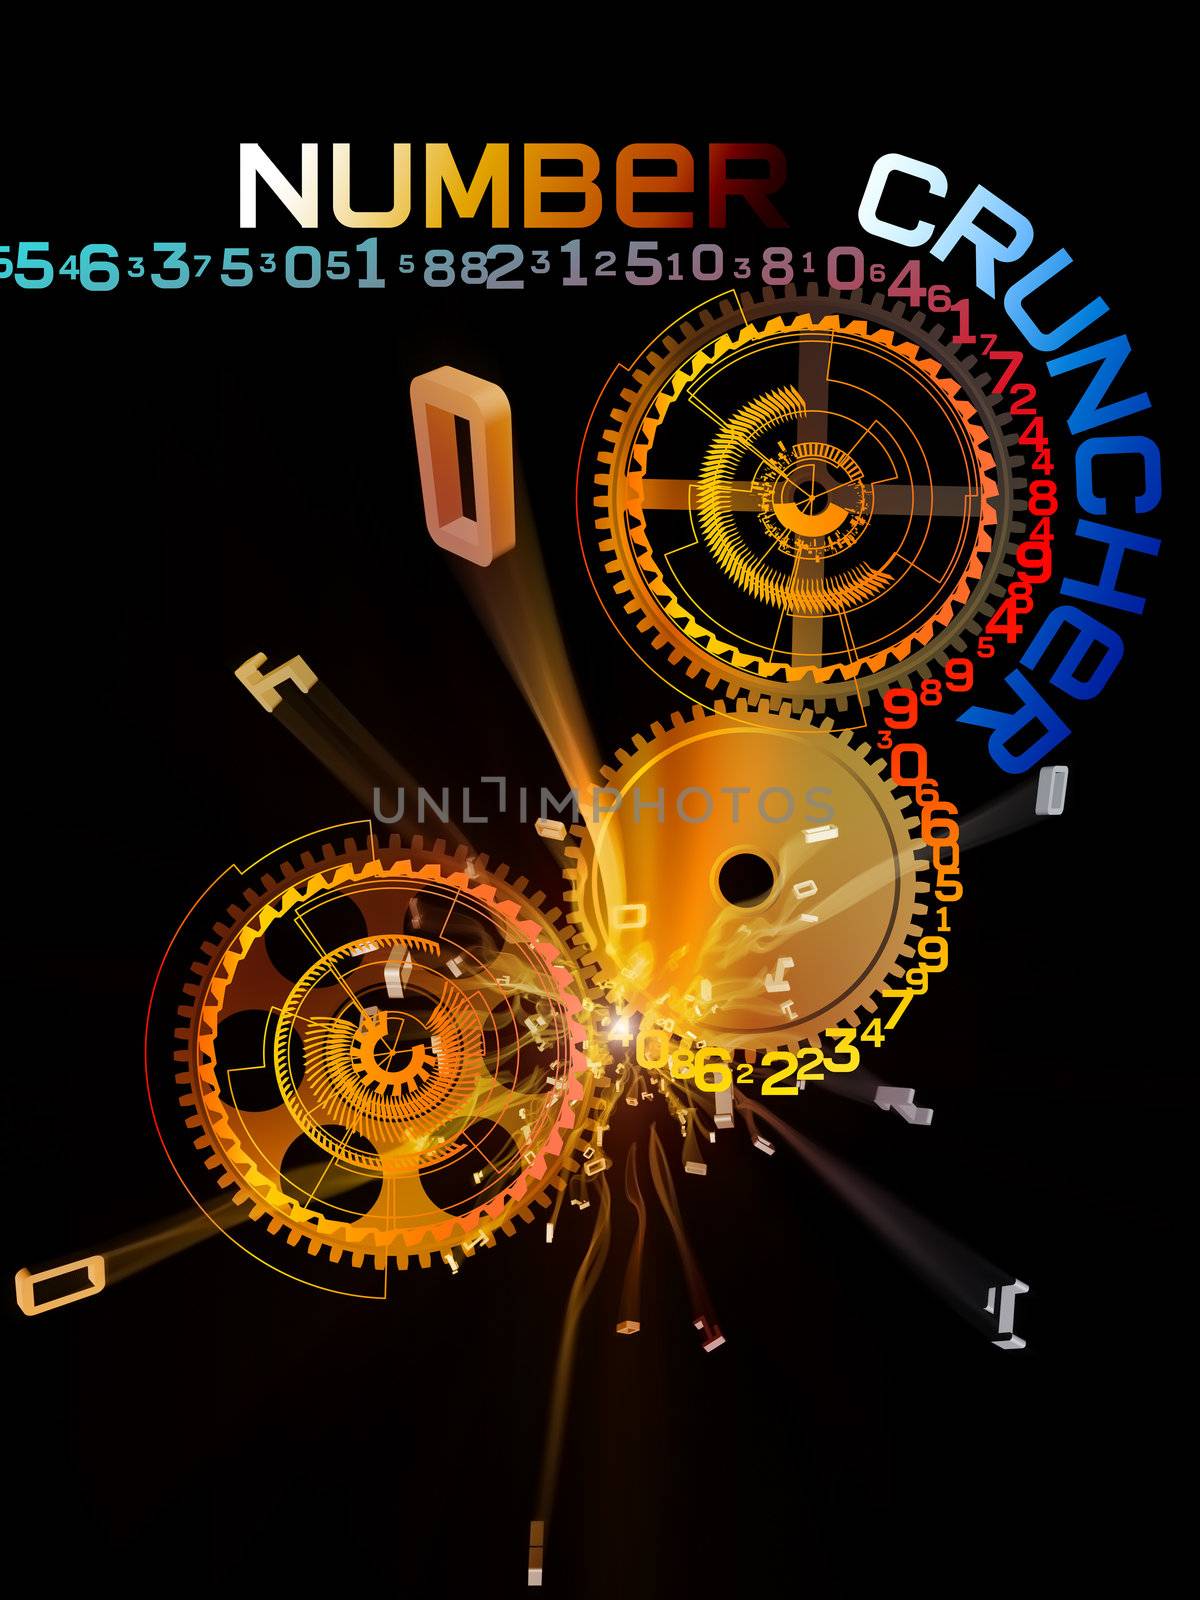 Interplay of numbers and gears on the subject digital processing, number crunching and computer technologies